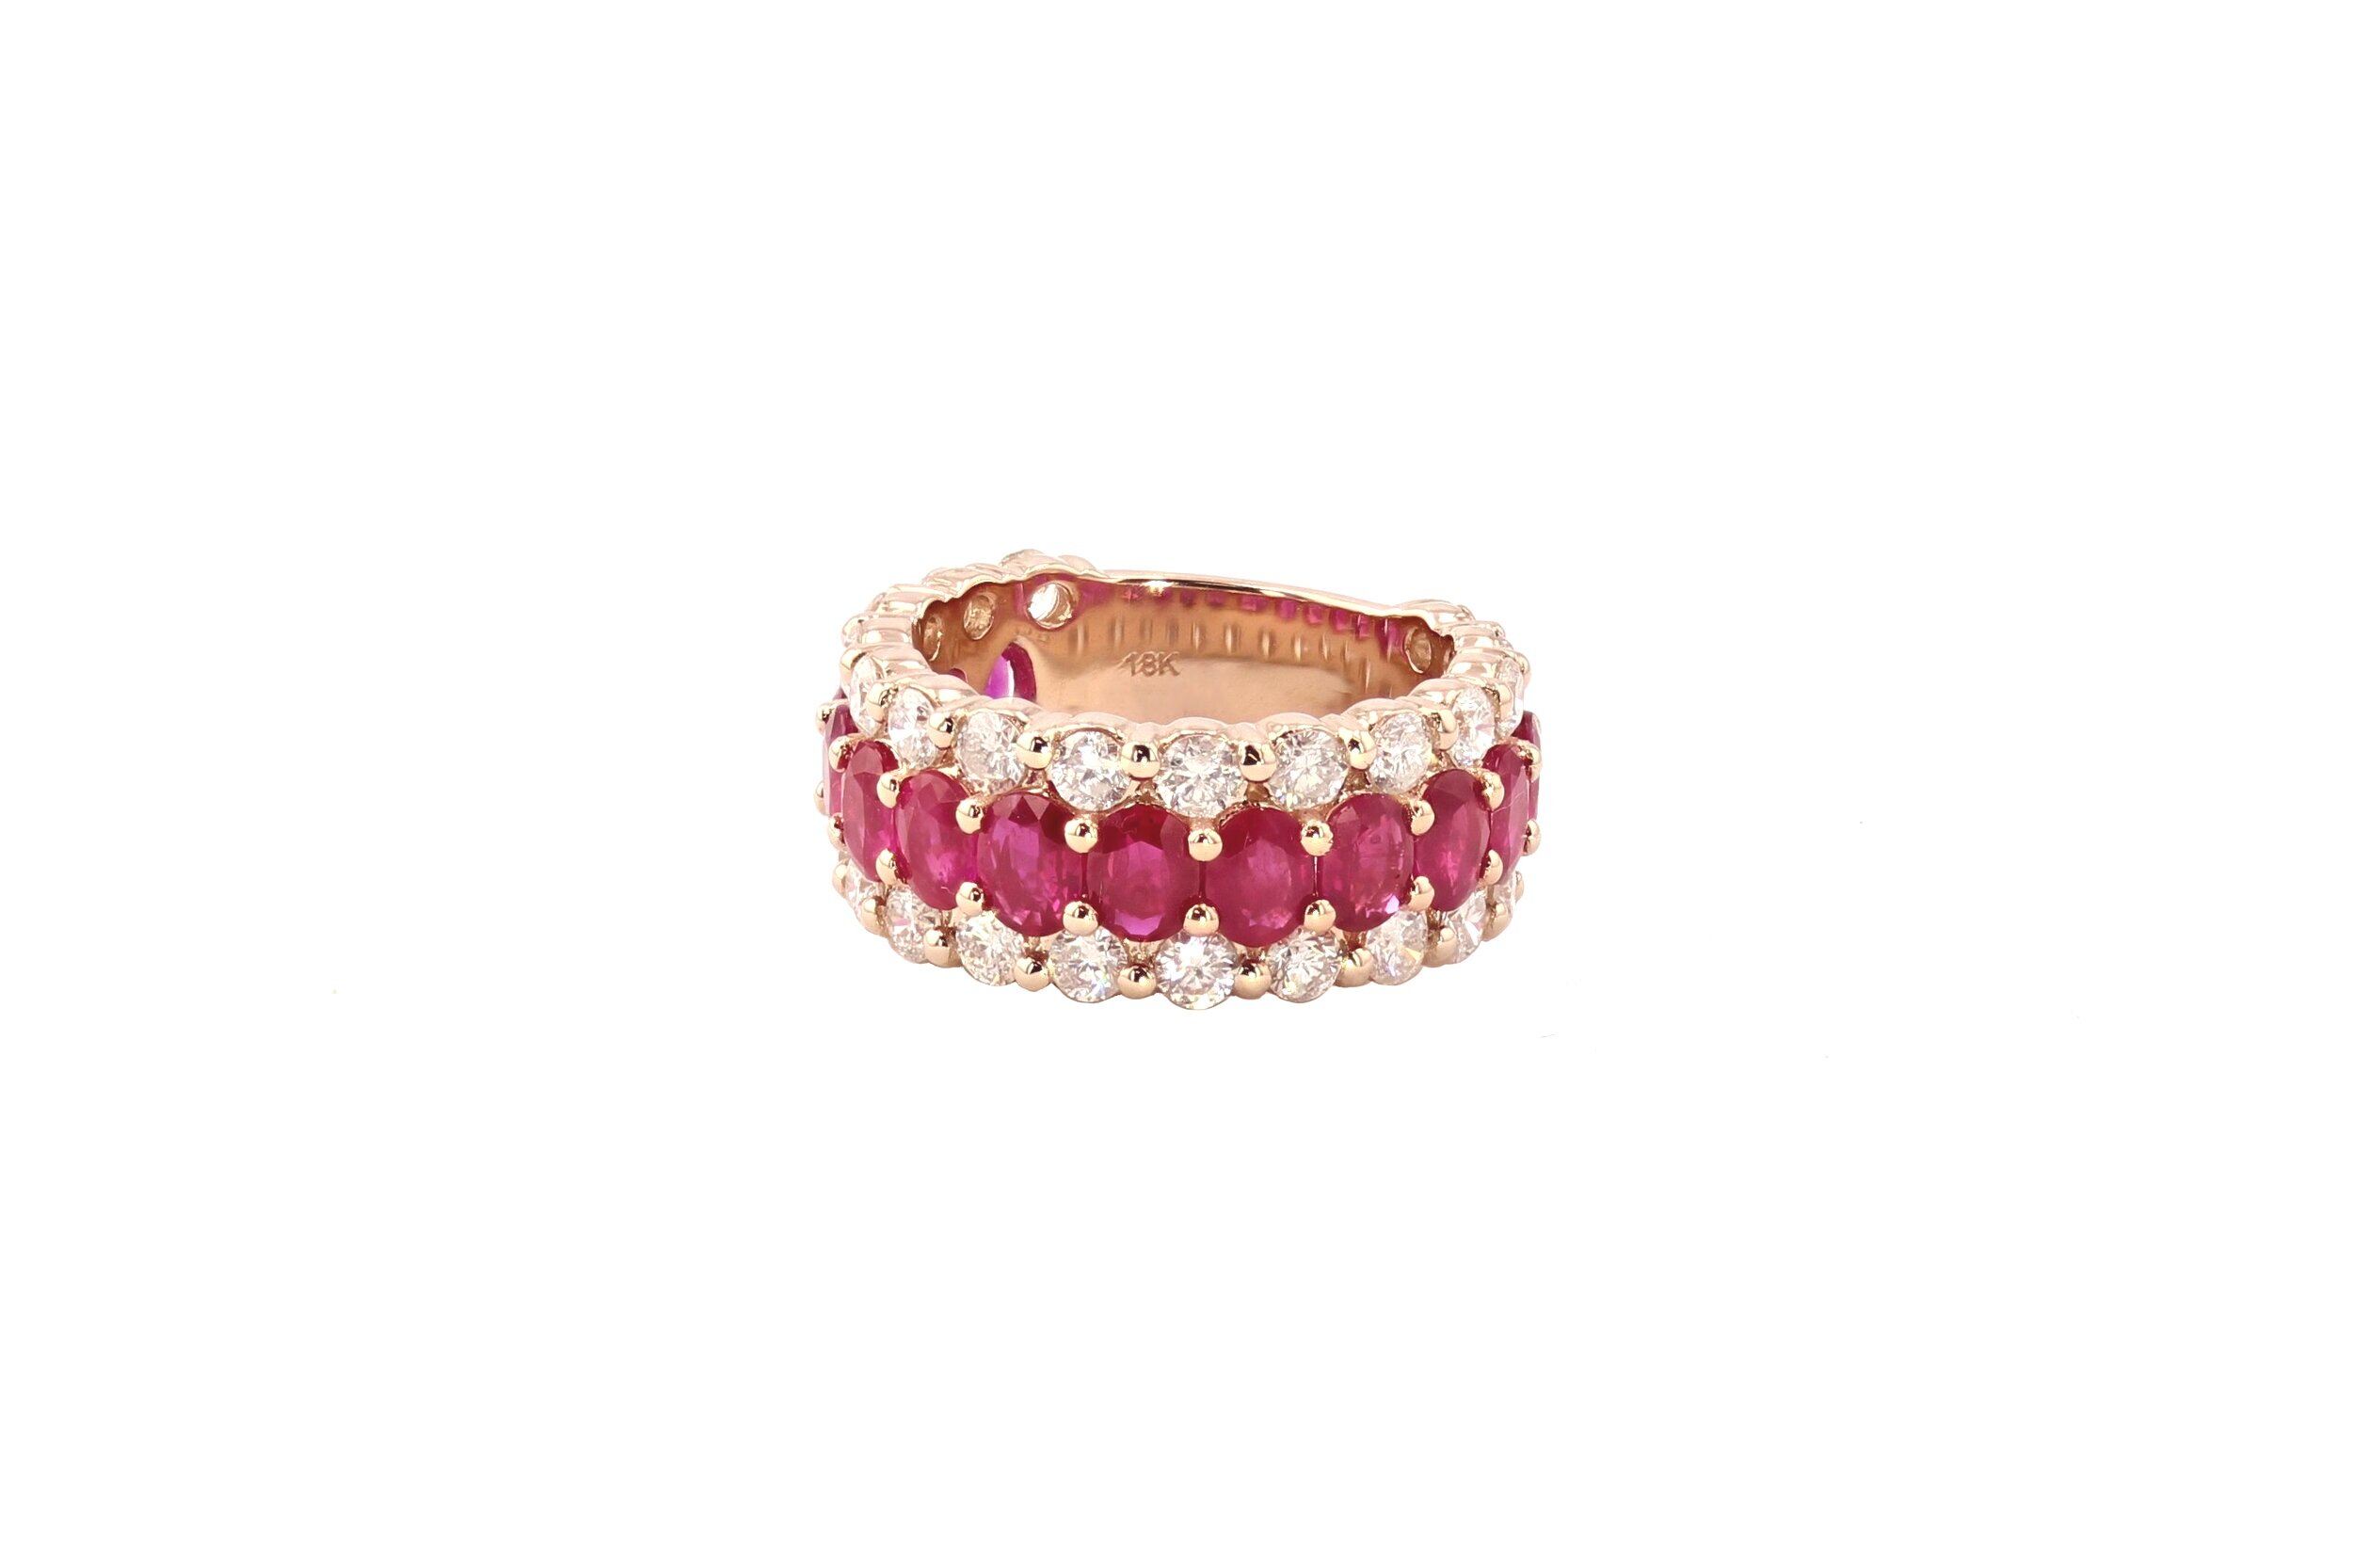 Gorgeous Statement Ring featuring with beautiful Oval Cut Rubies (3.87 ctw.) and Round Brilliant Cut Diamonds 1(2.27 ctw.), set in 18K Rose Gold. $9500